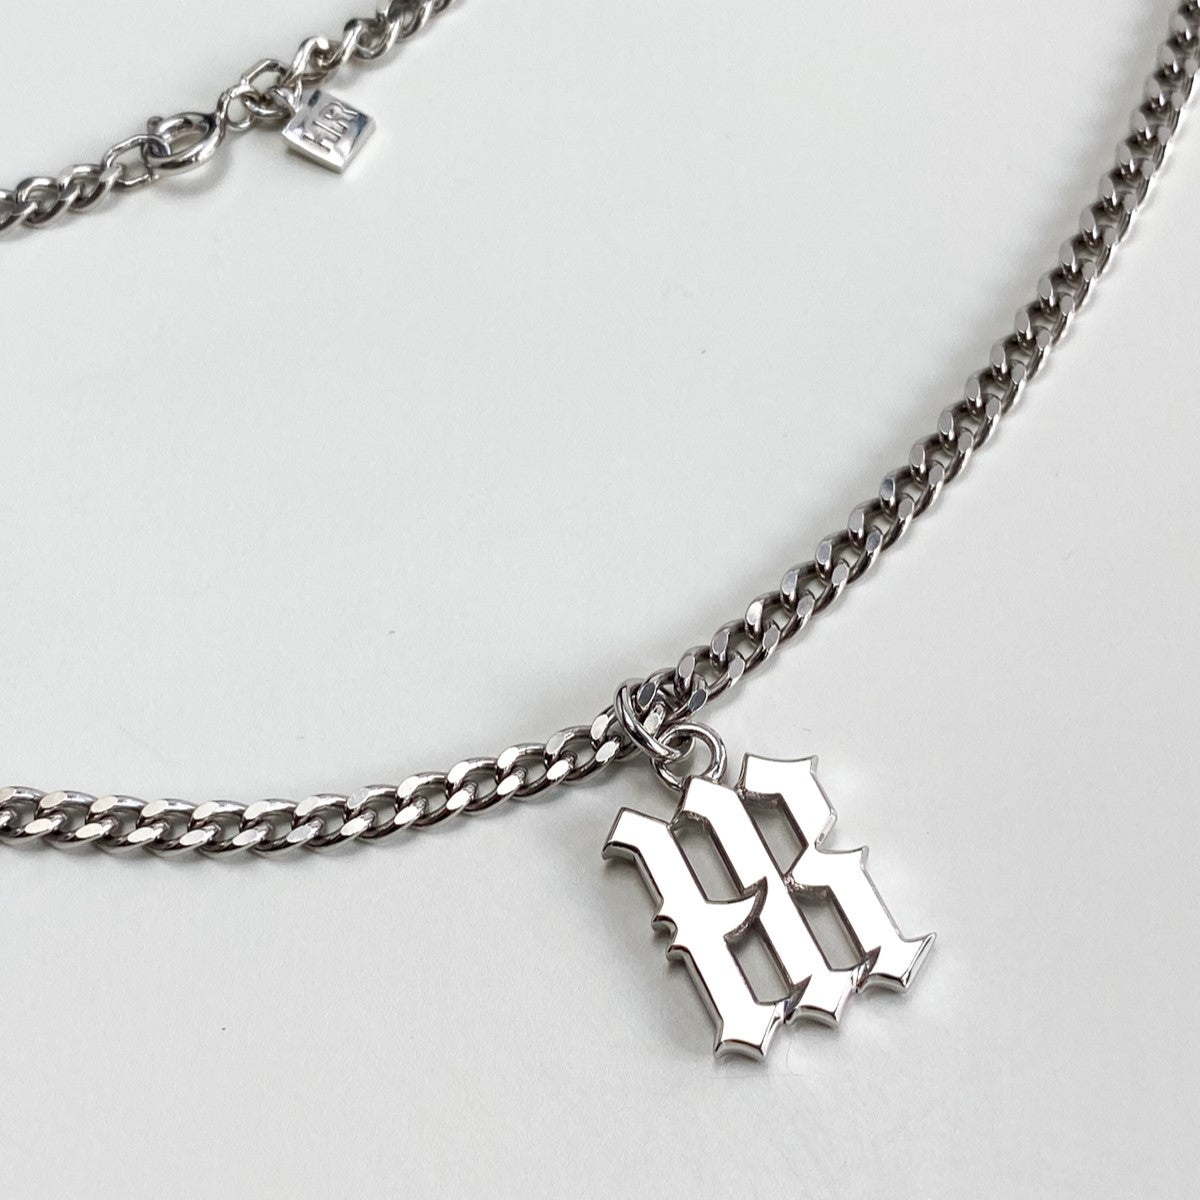 PENDANT "GOTHIC LOGO" ON A CHAIN / SILVER